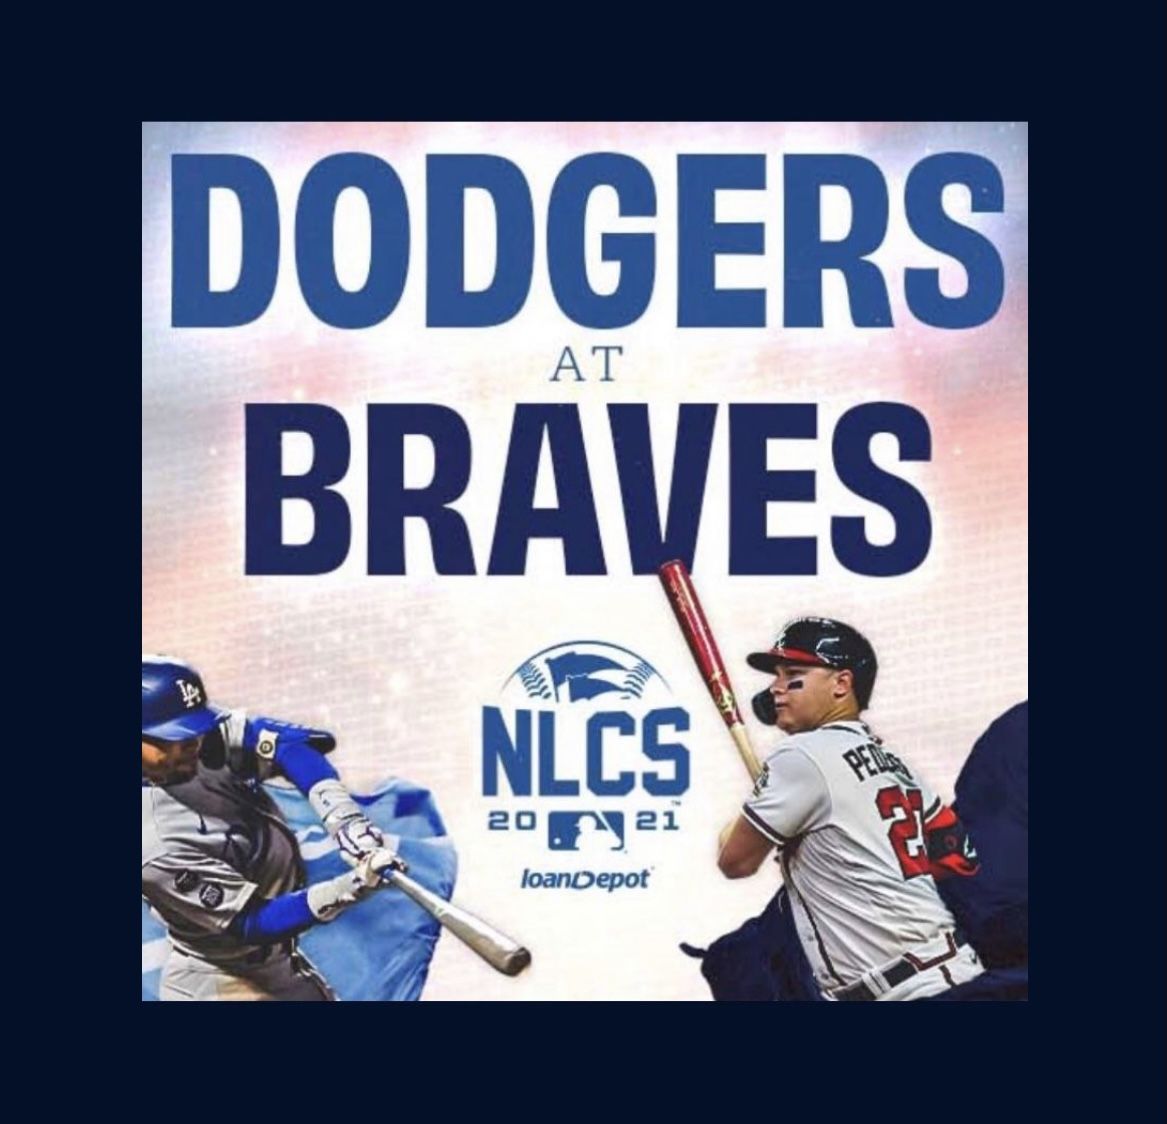 DODGERS VS BRAVES NLCS GAME 5 10/21 5PM 